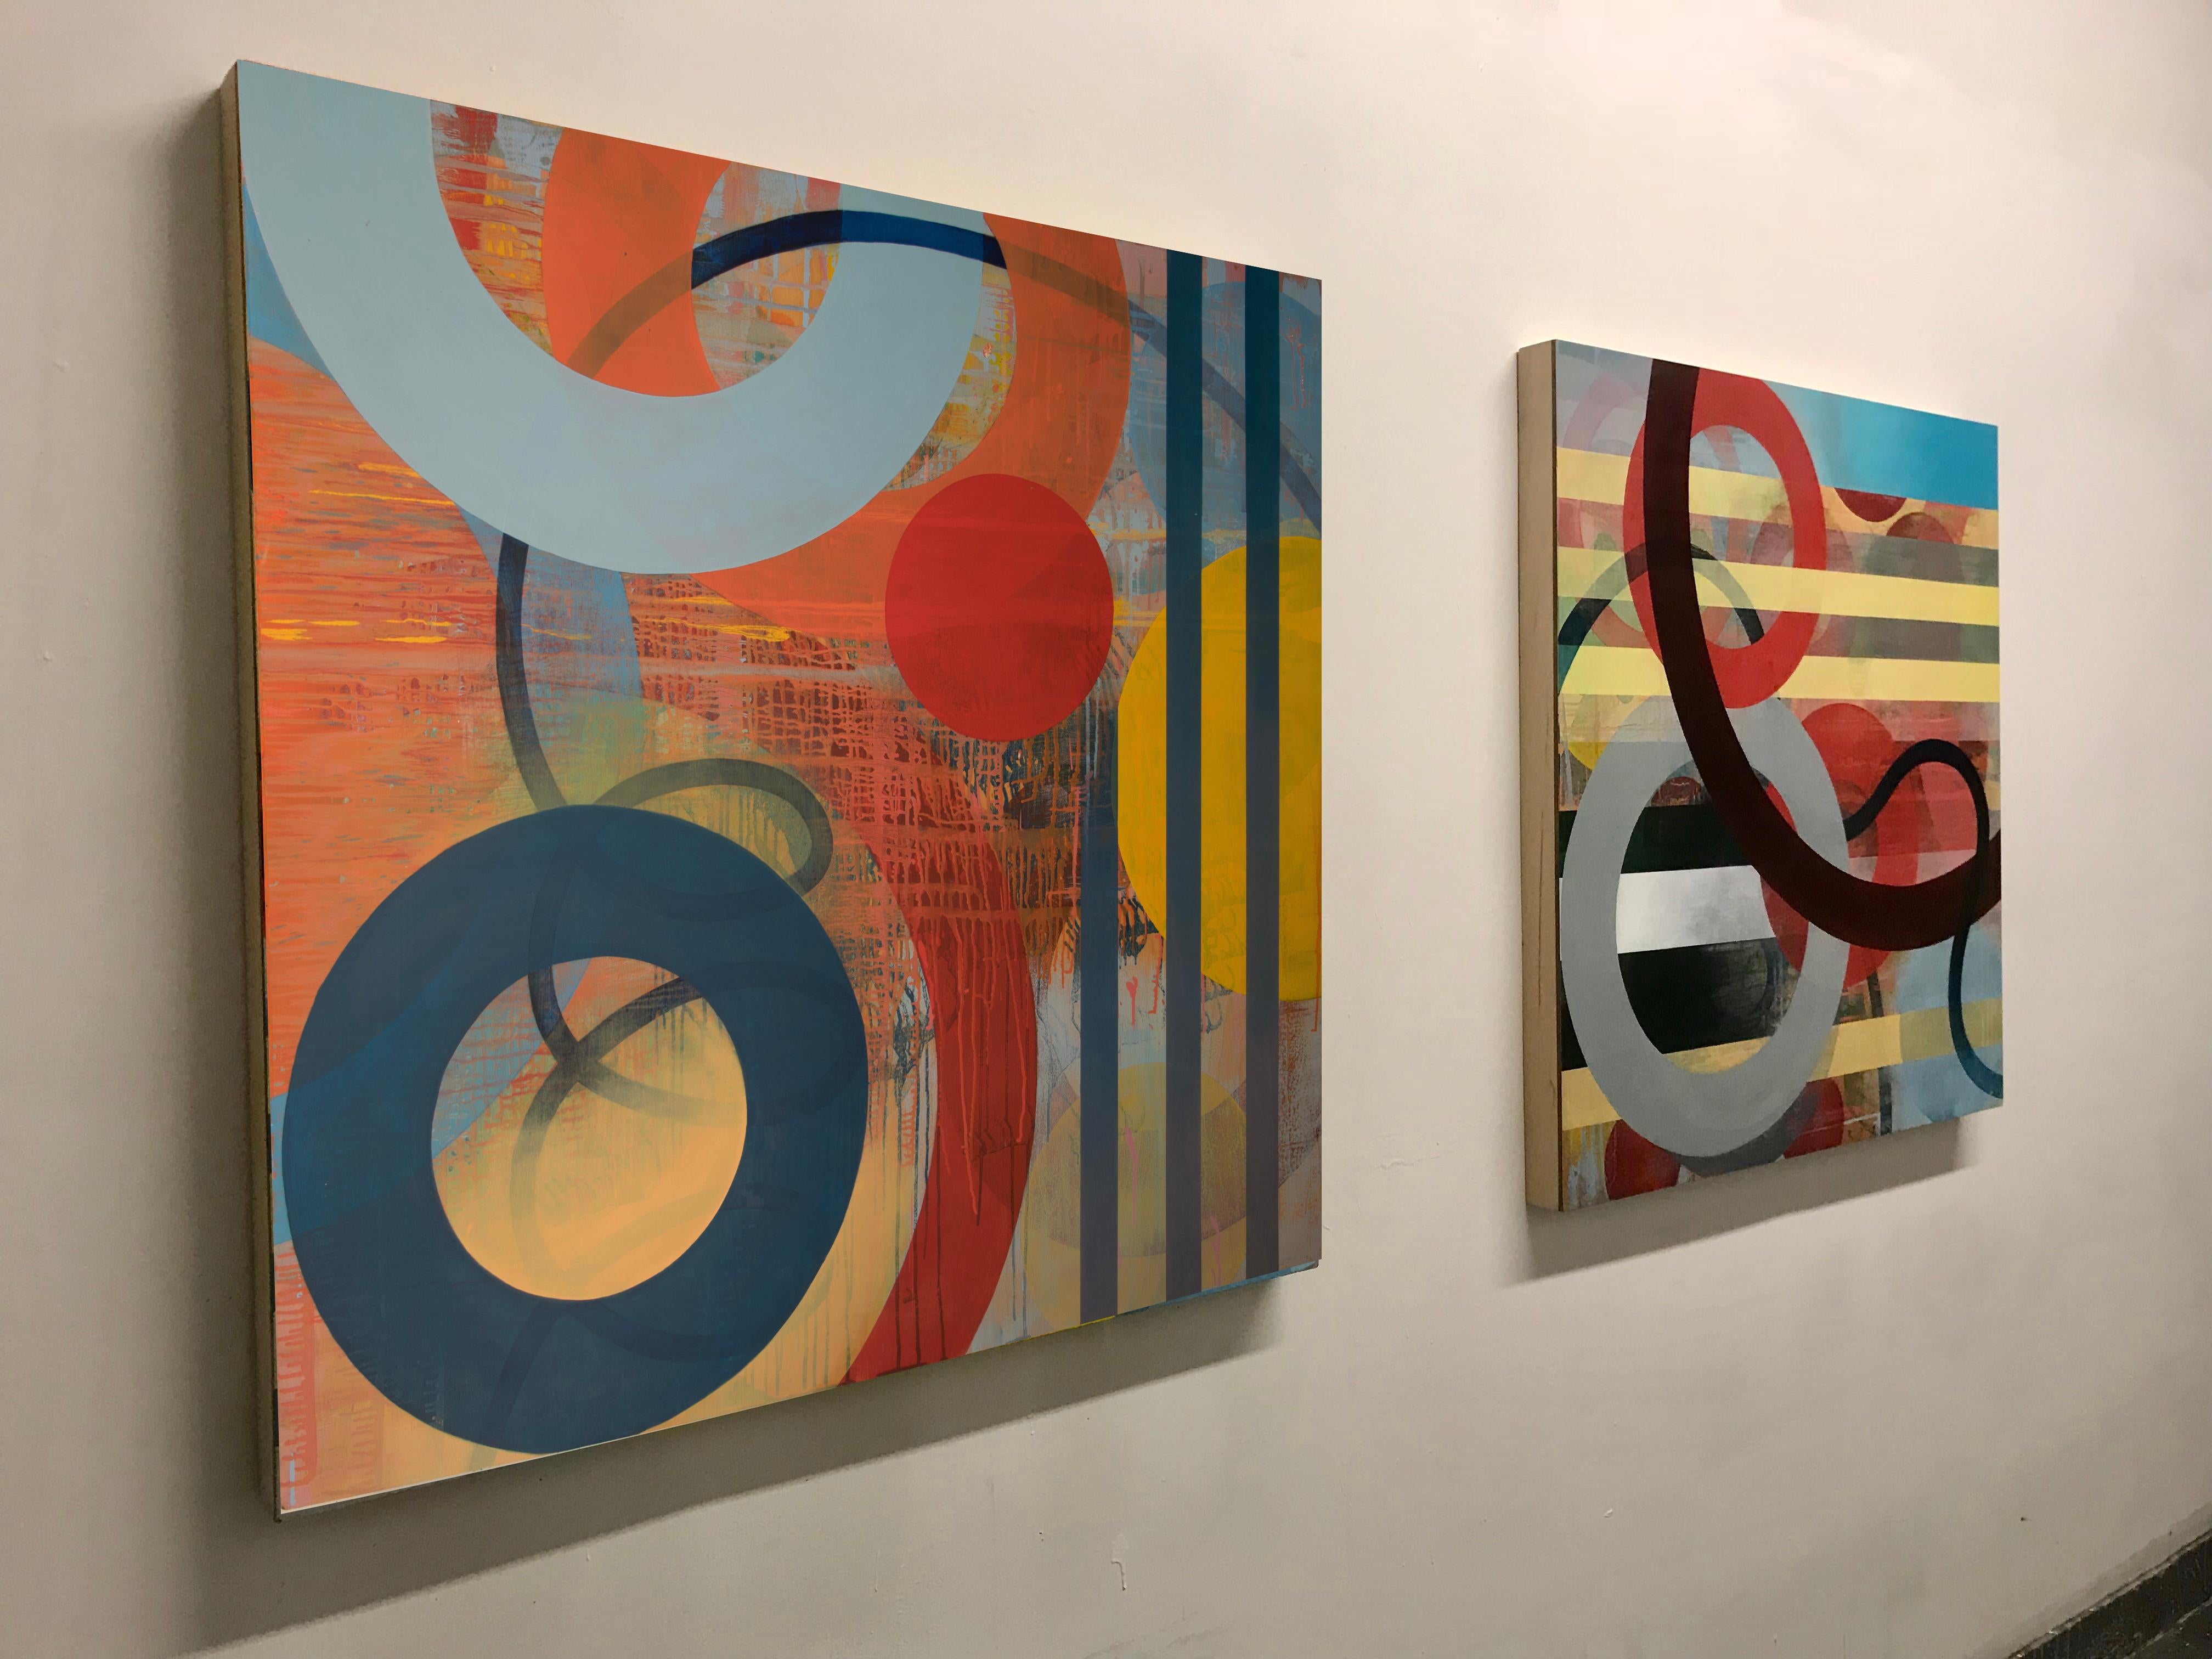 Linda Schmidt's beautiful colorful geometric abstraction paintings are full of subtle layers that give a sense of motion within the colors and forms and they shift from foreground to background and make the eye travel around the piece. Her